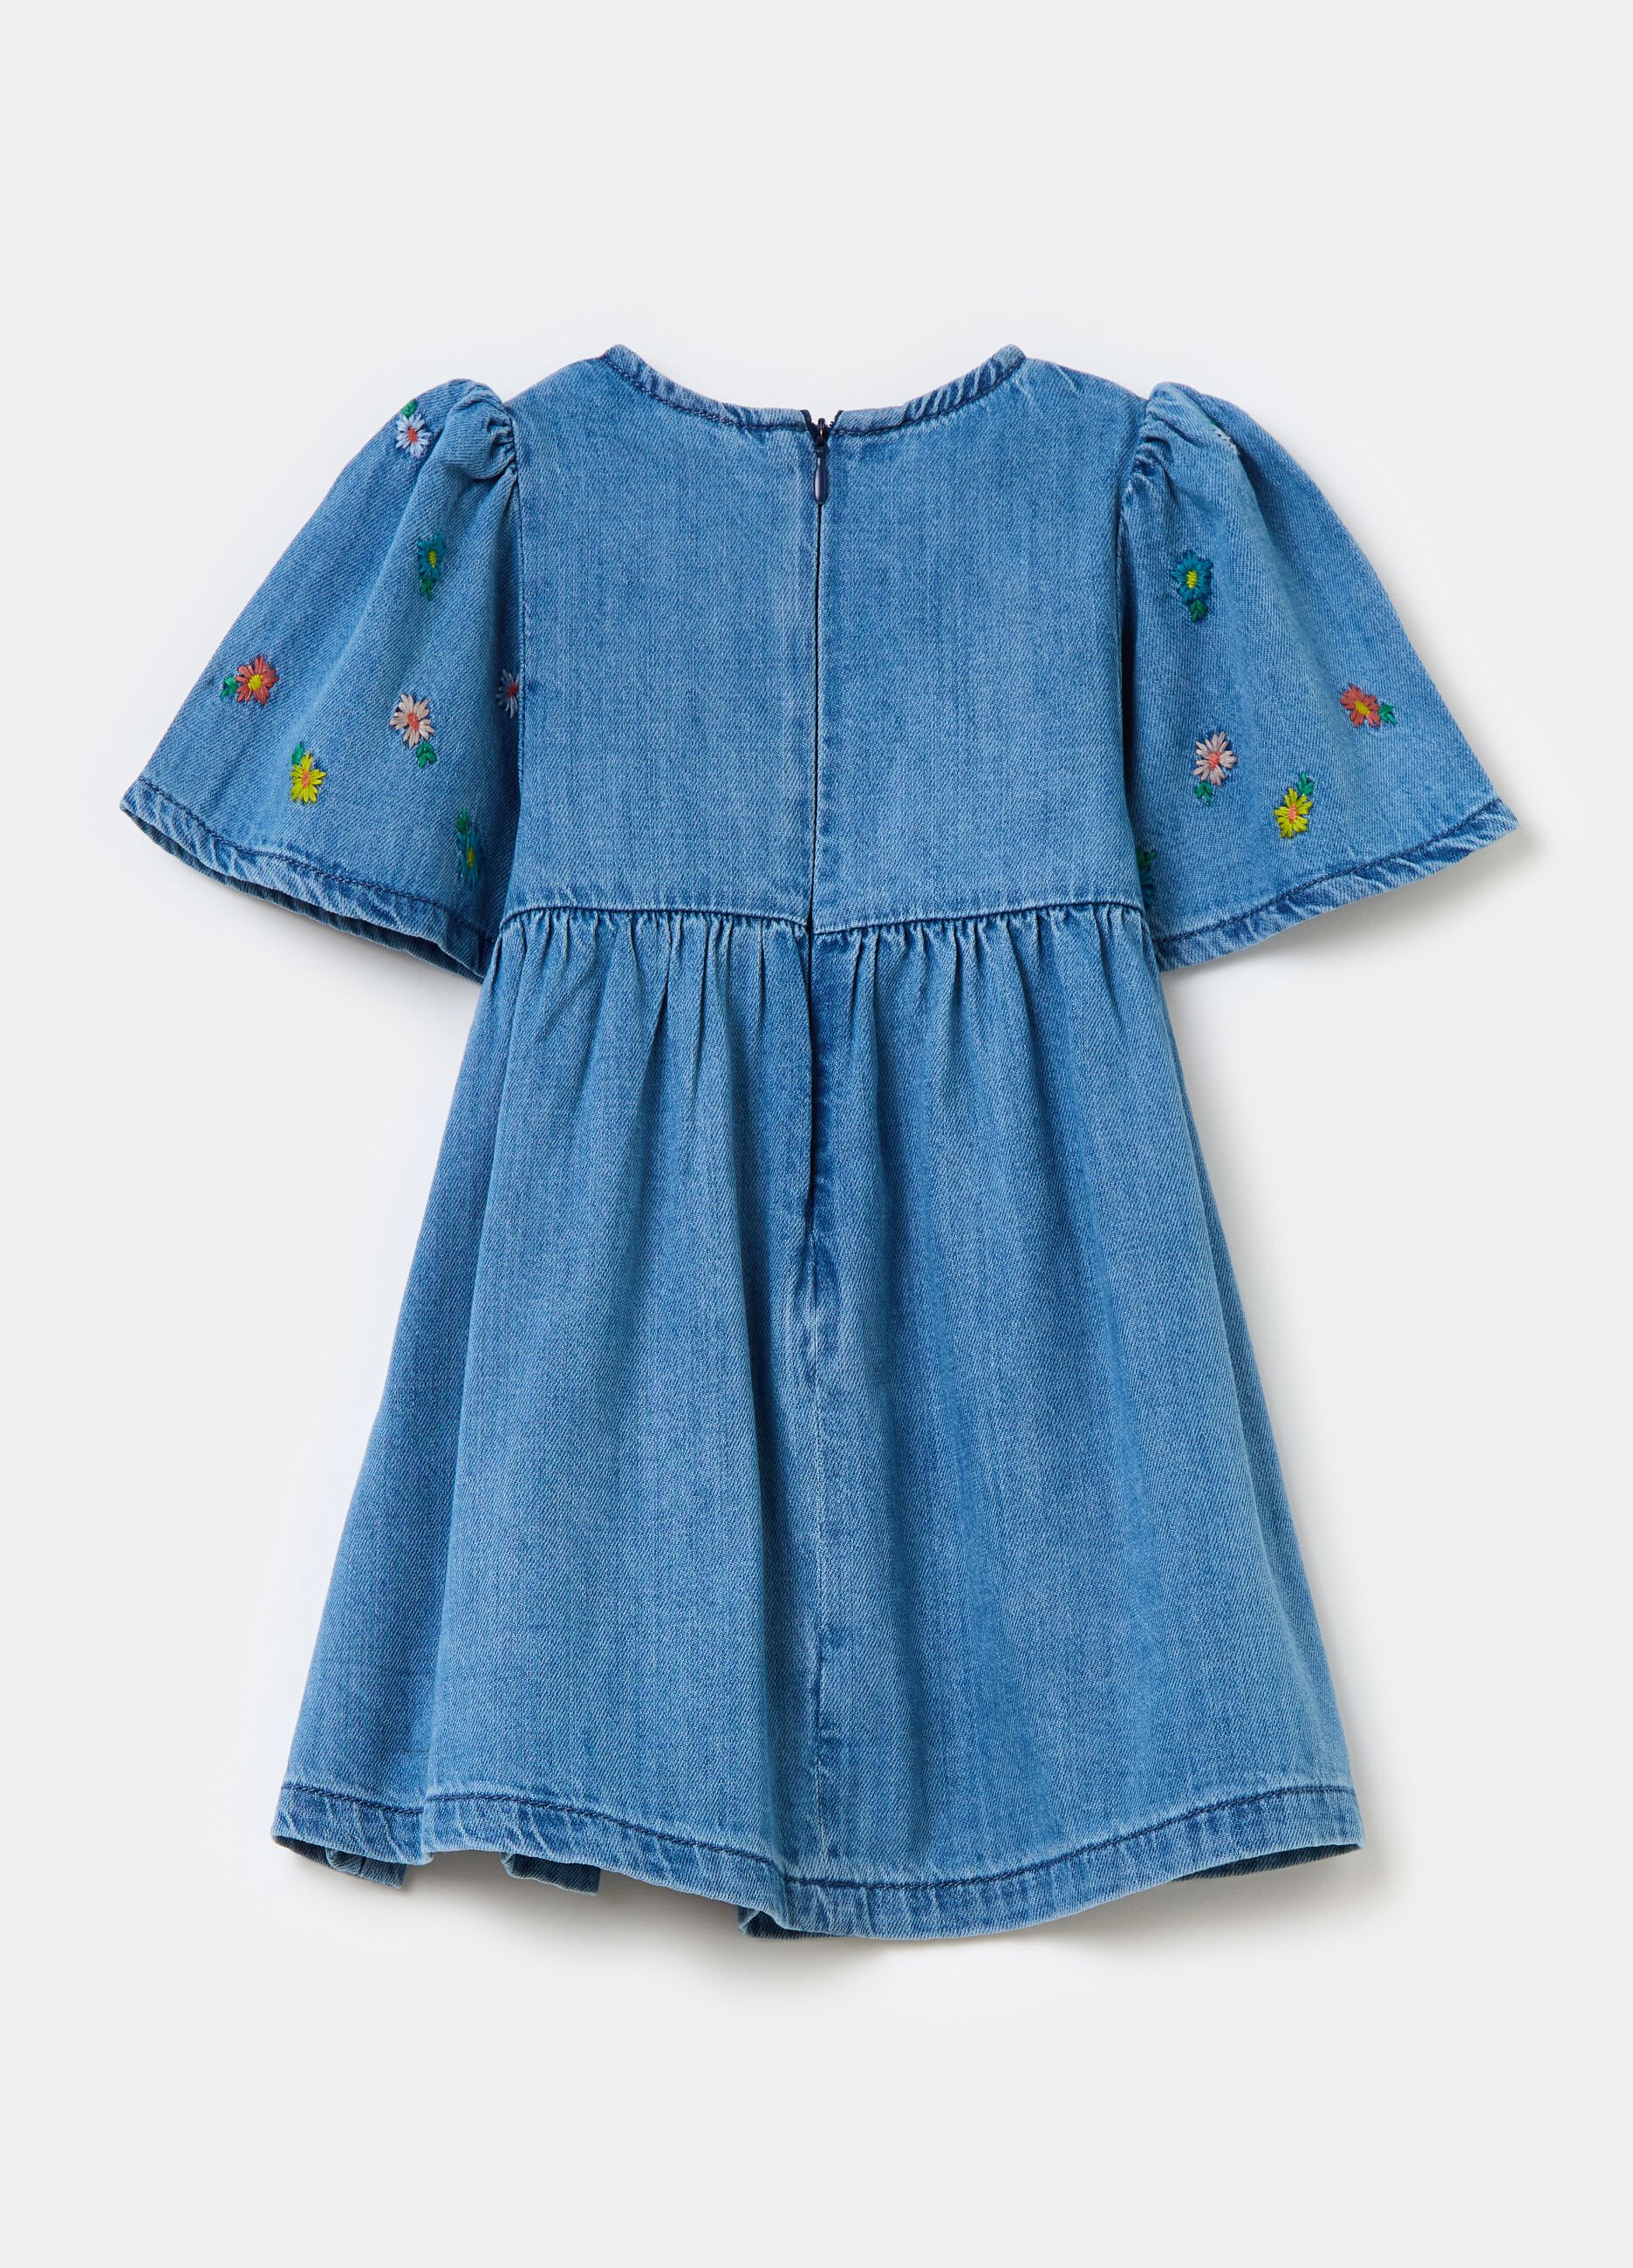 Denim dress with small flowers embroidery